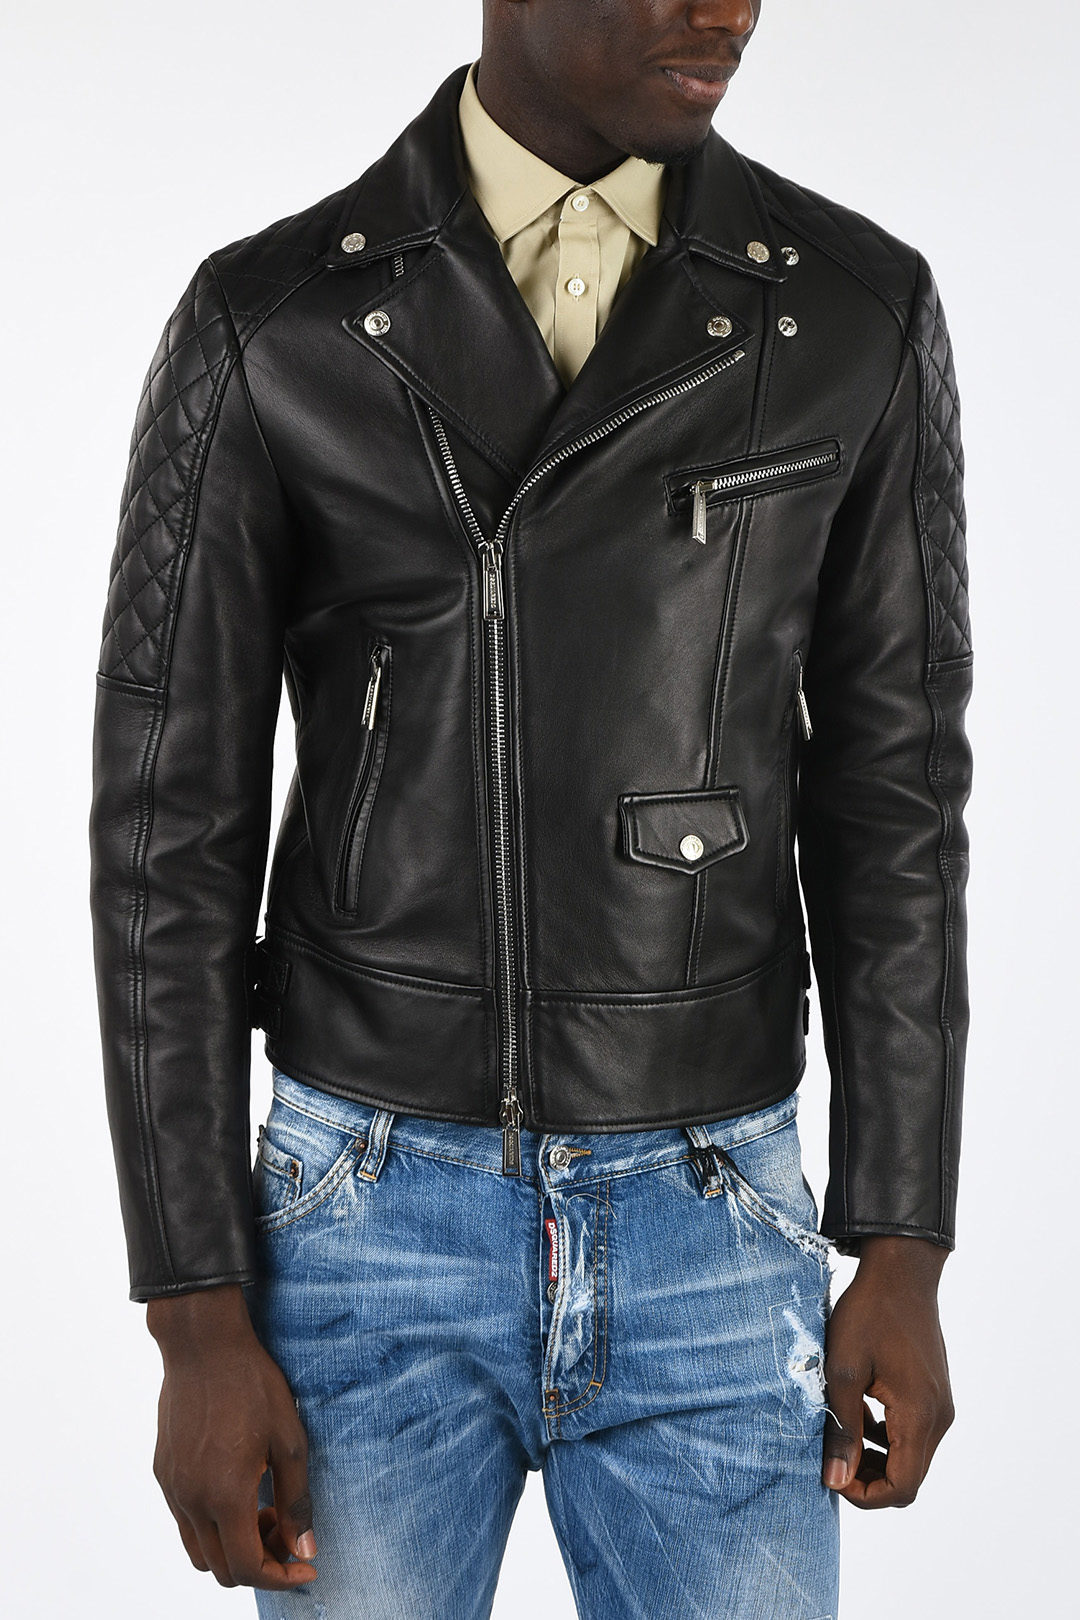 free shipping and return Top Selling Products leather biker jacket